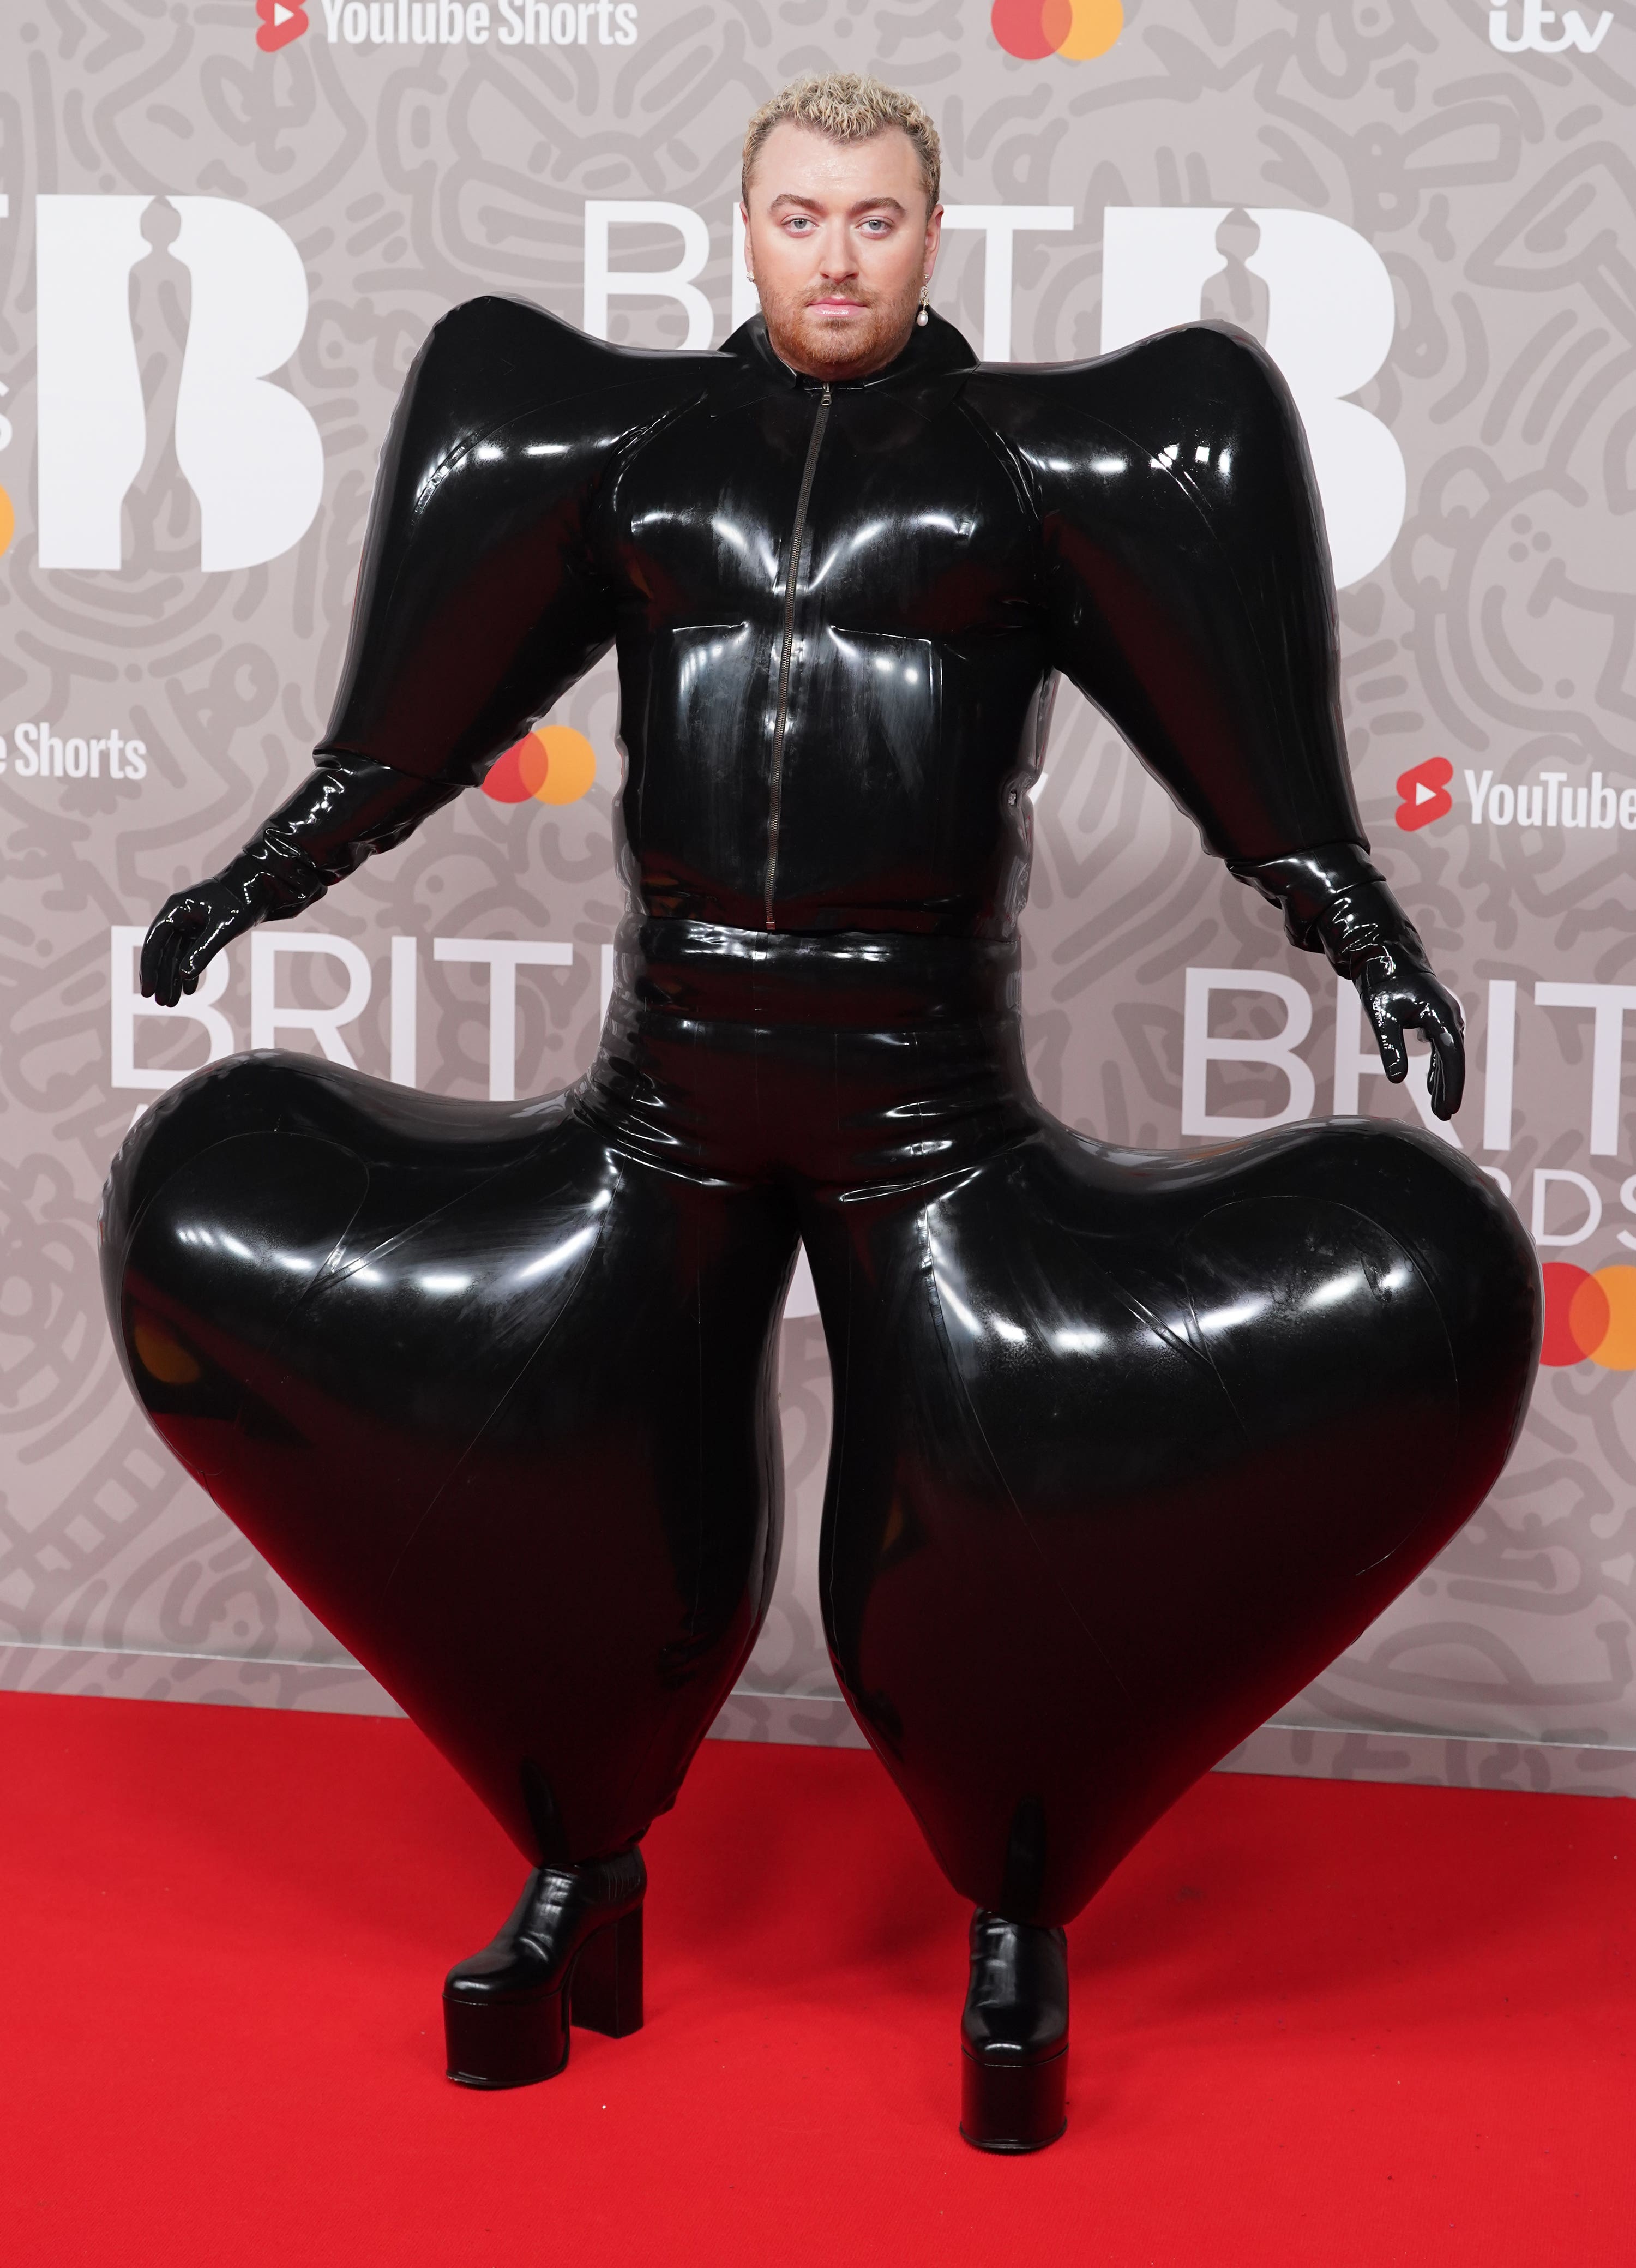 Sam Smith’s extravagant latex outfit at the Brit Awards.